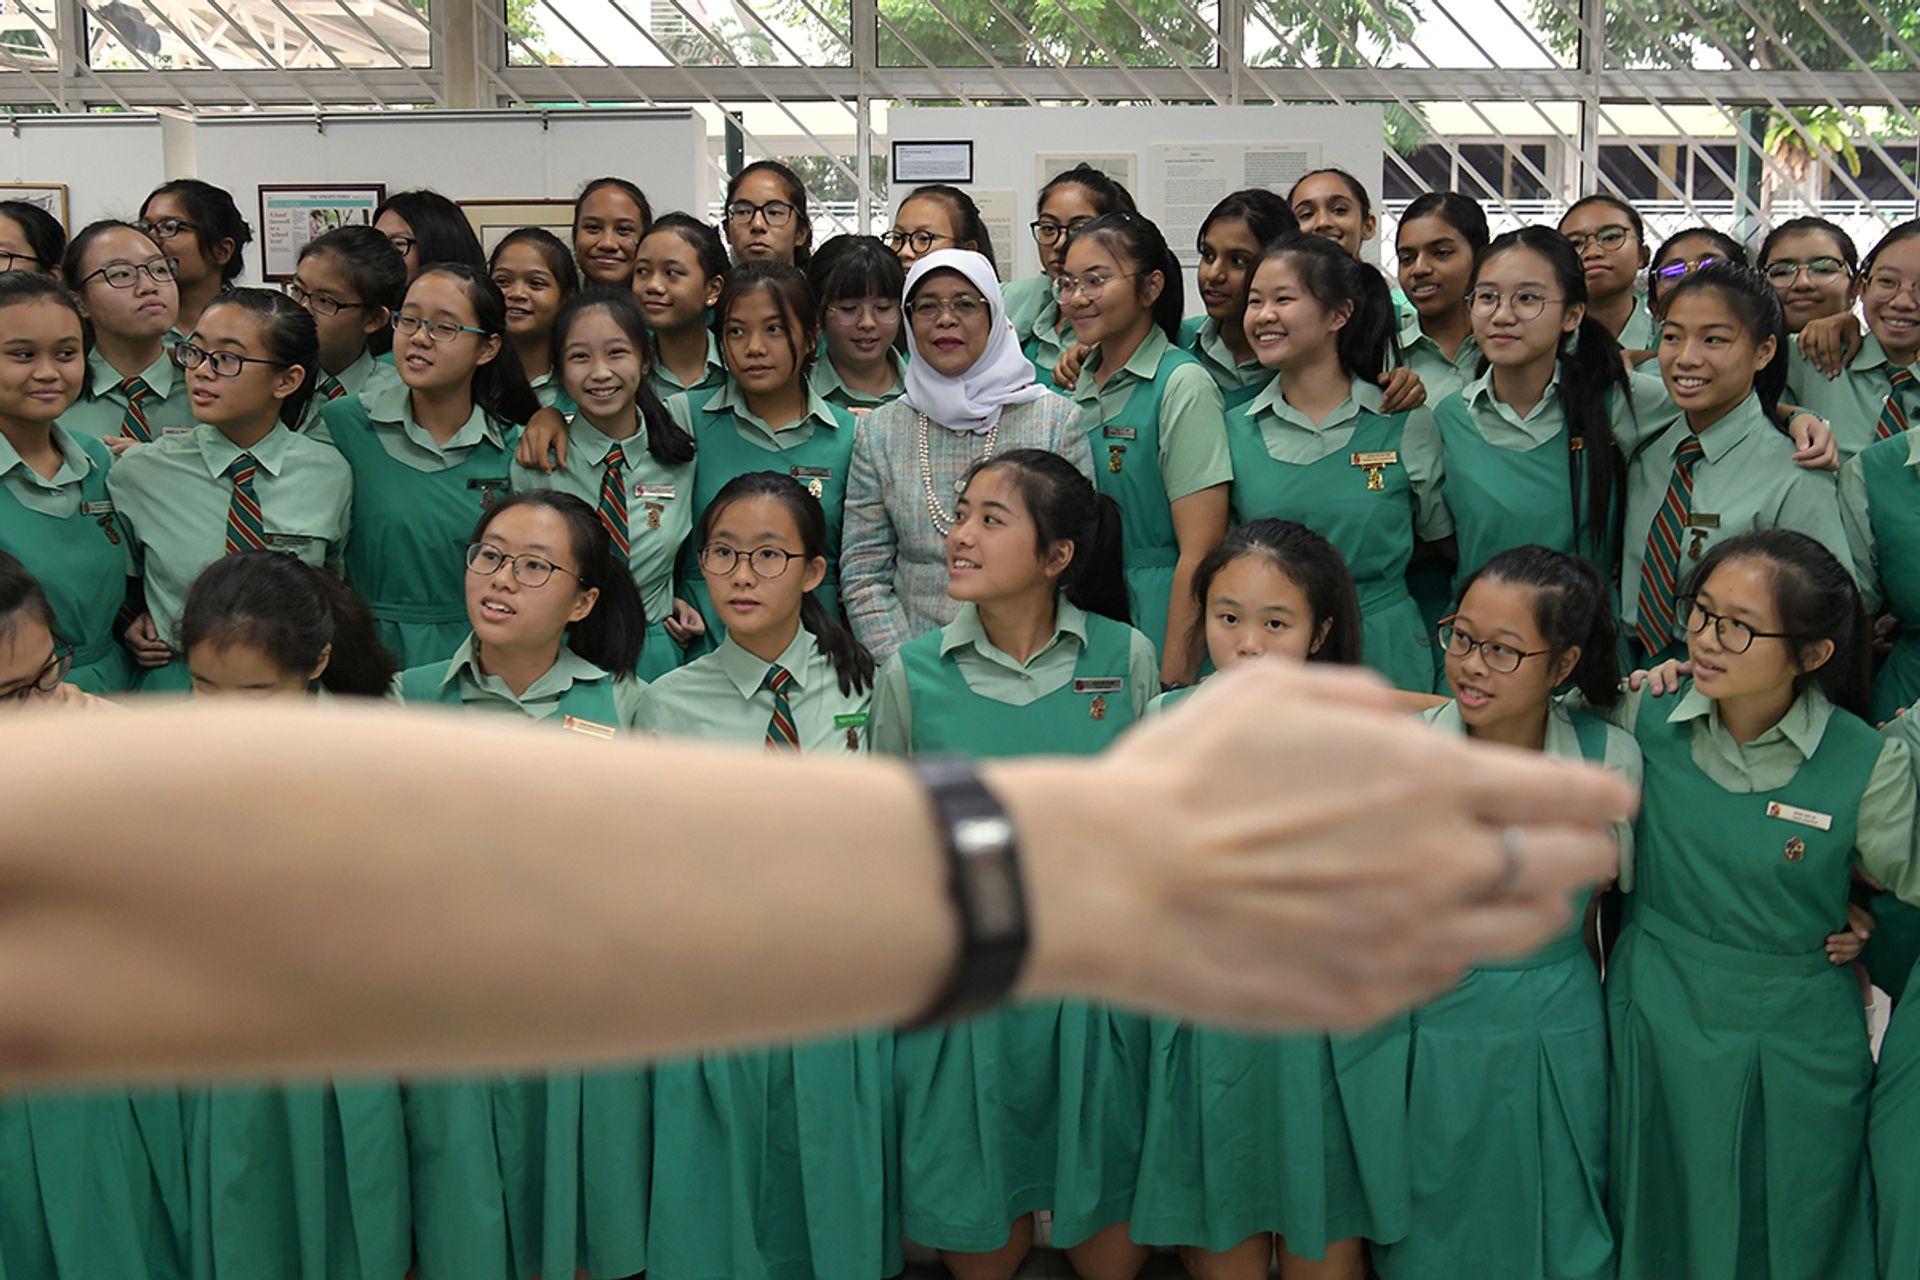 President Halimah in a photo shoot with students from her alma mater, Tanjong Katong Girls’ School, after a dialogue at the school on June 27, 2018. ST PHOTO: NG SOR LUAN